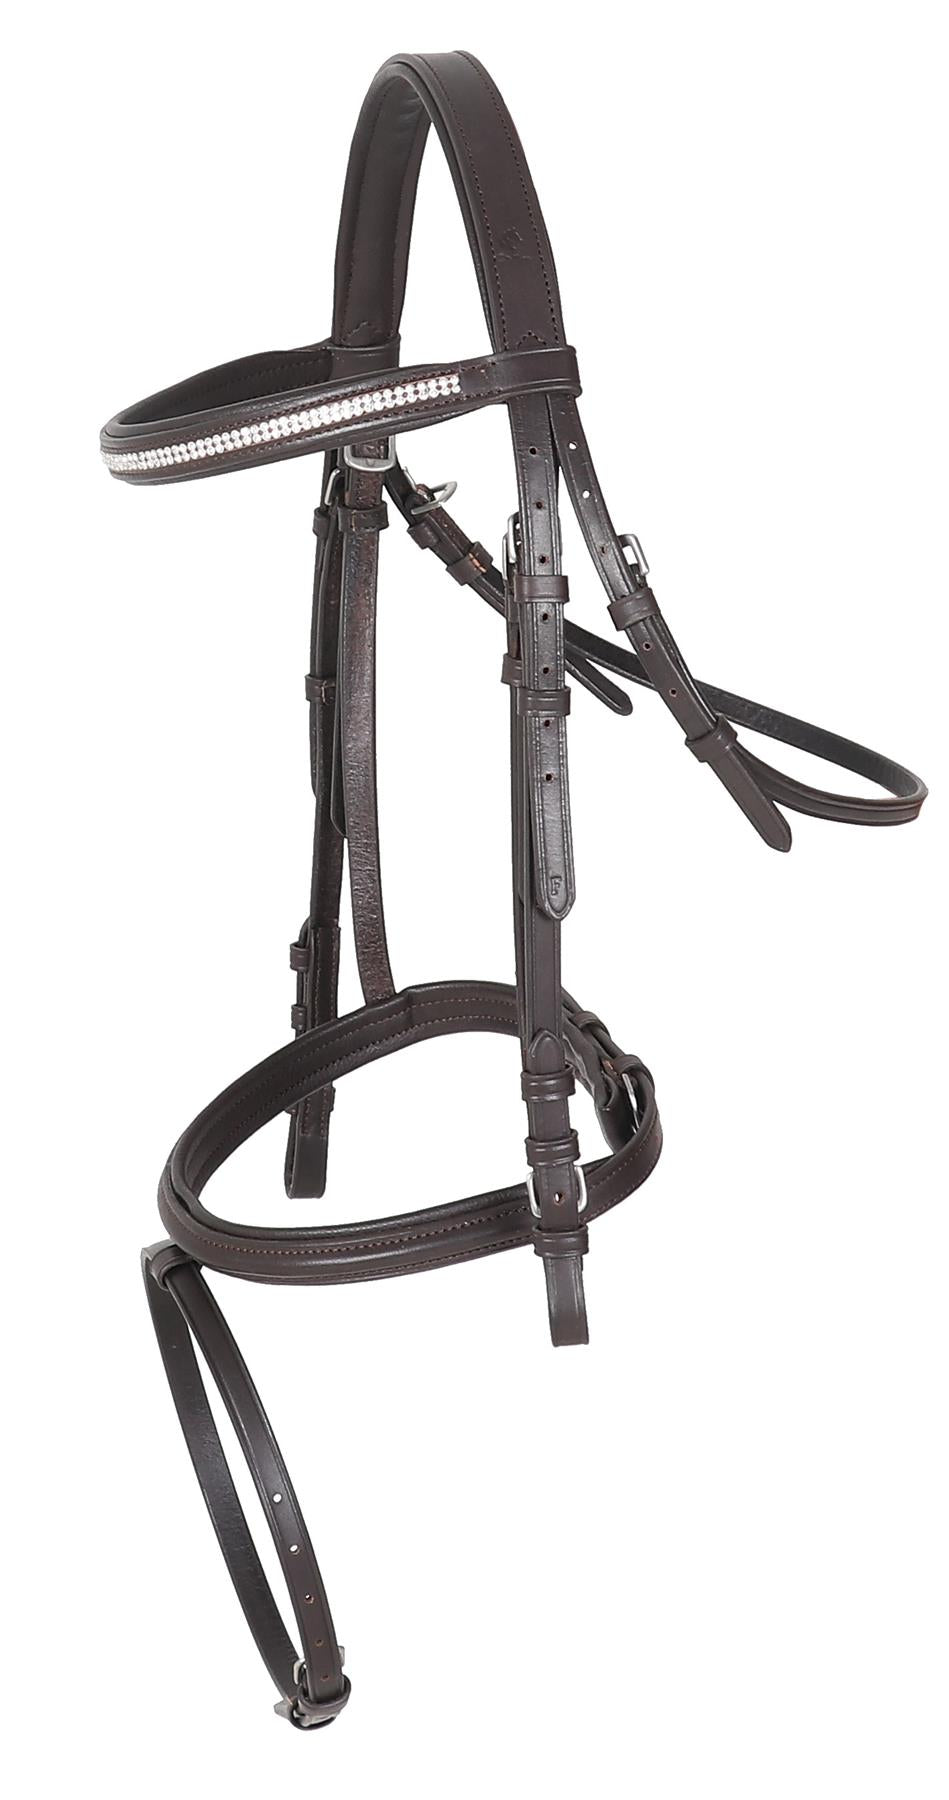 Leather Padded Horse Bridle with FREE Reins Flash Noseband Black Brown 4 Sizes